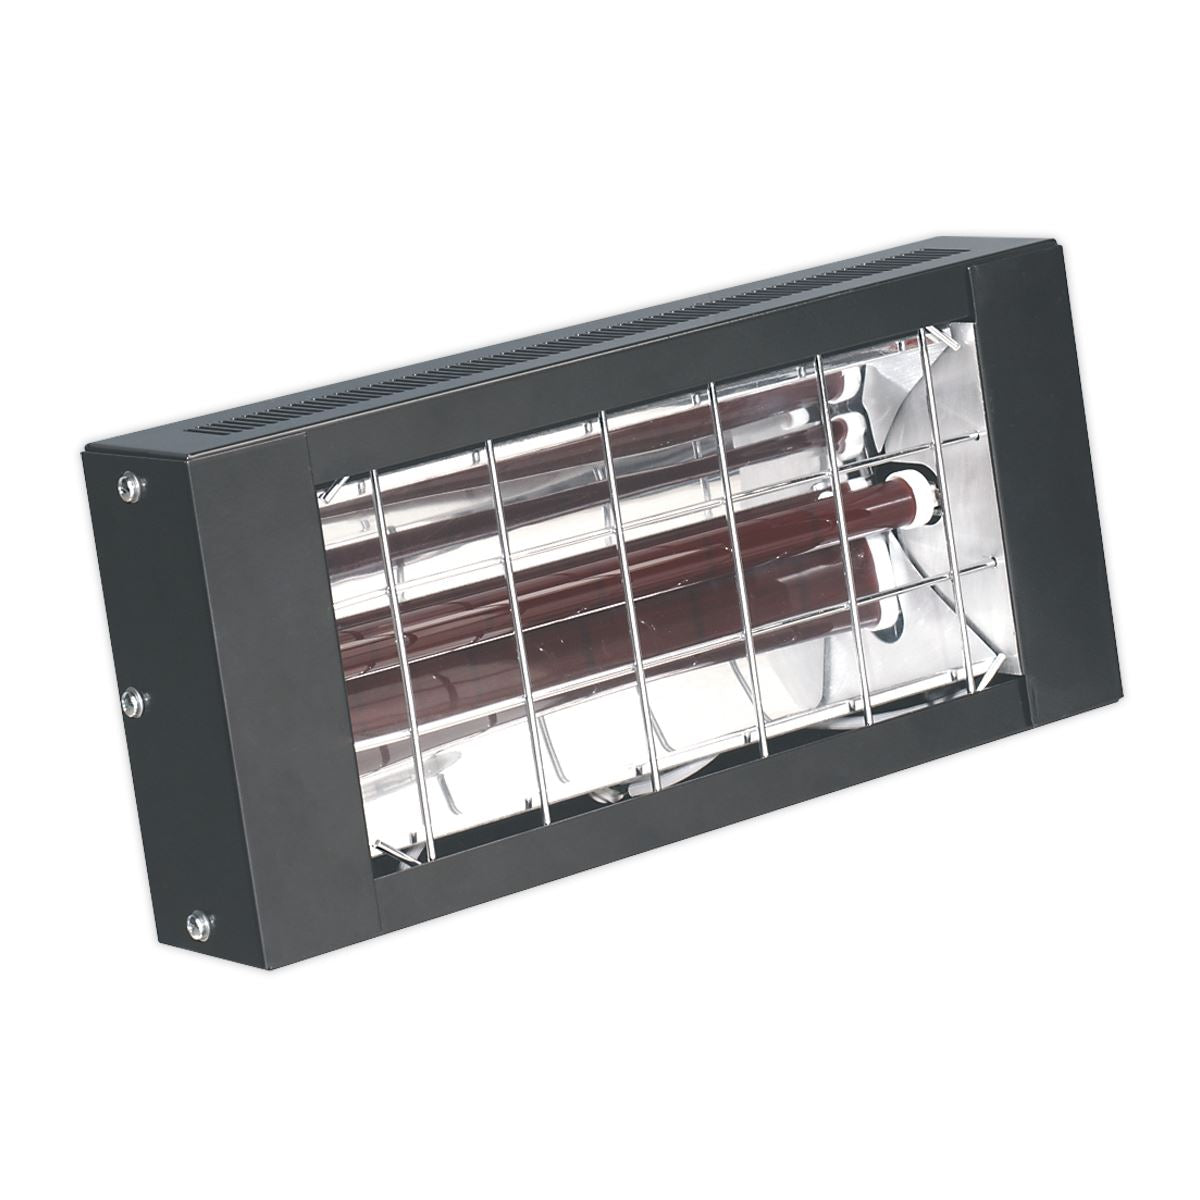 Sealey Infrared Quartz Heater - Wall Mounting 1500W/230V